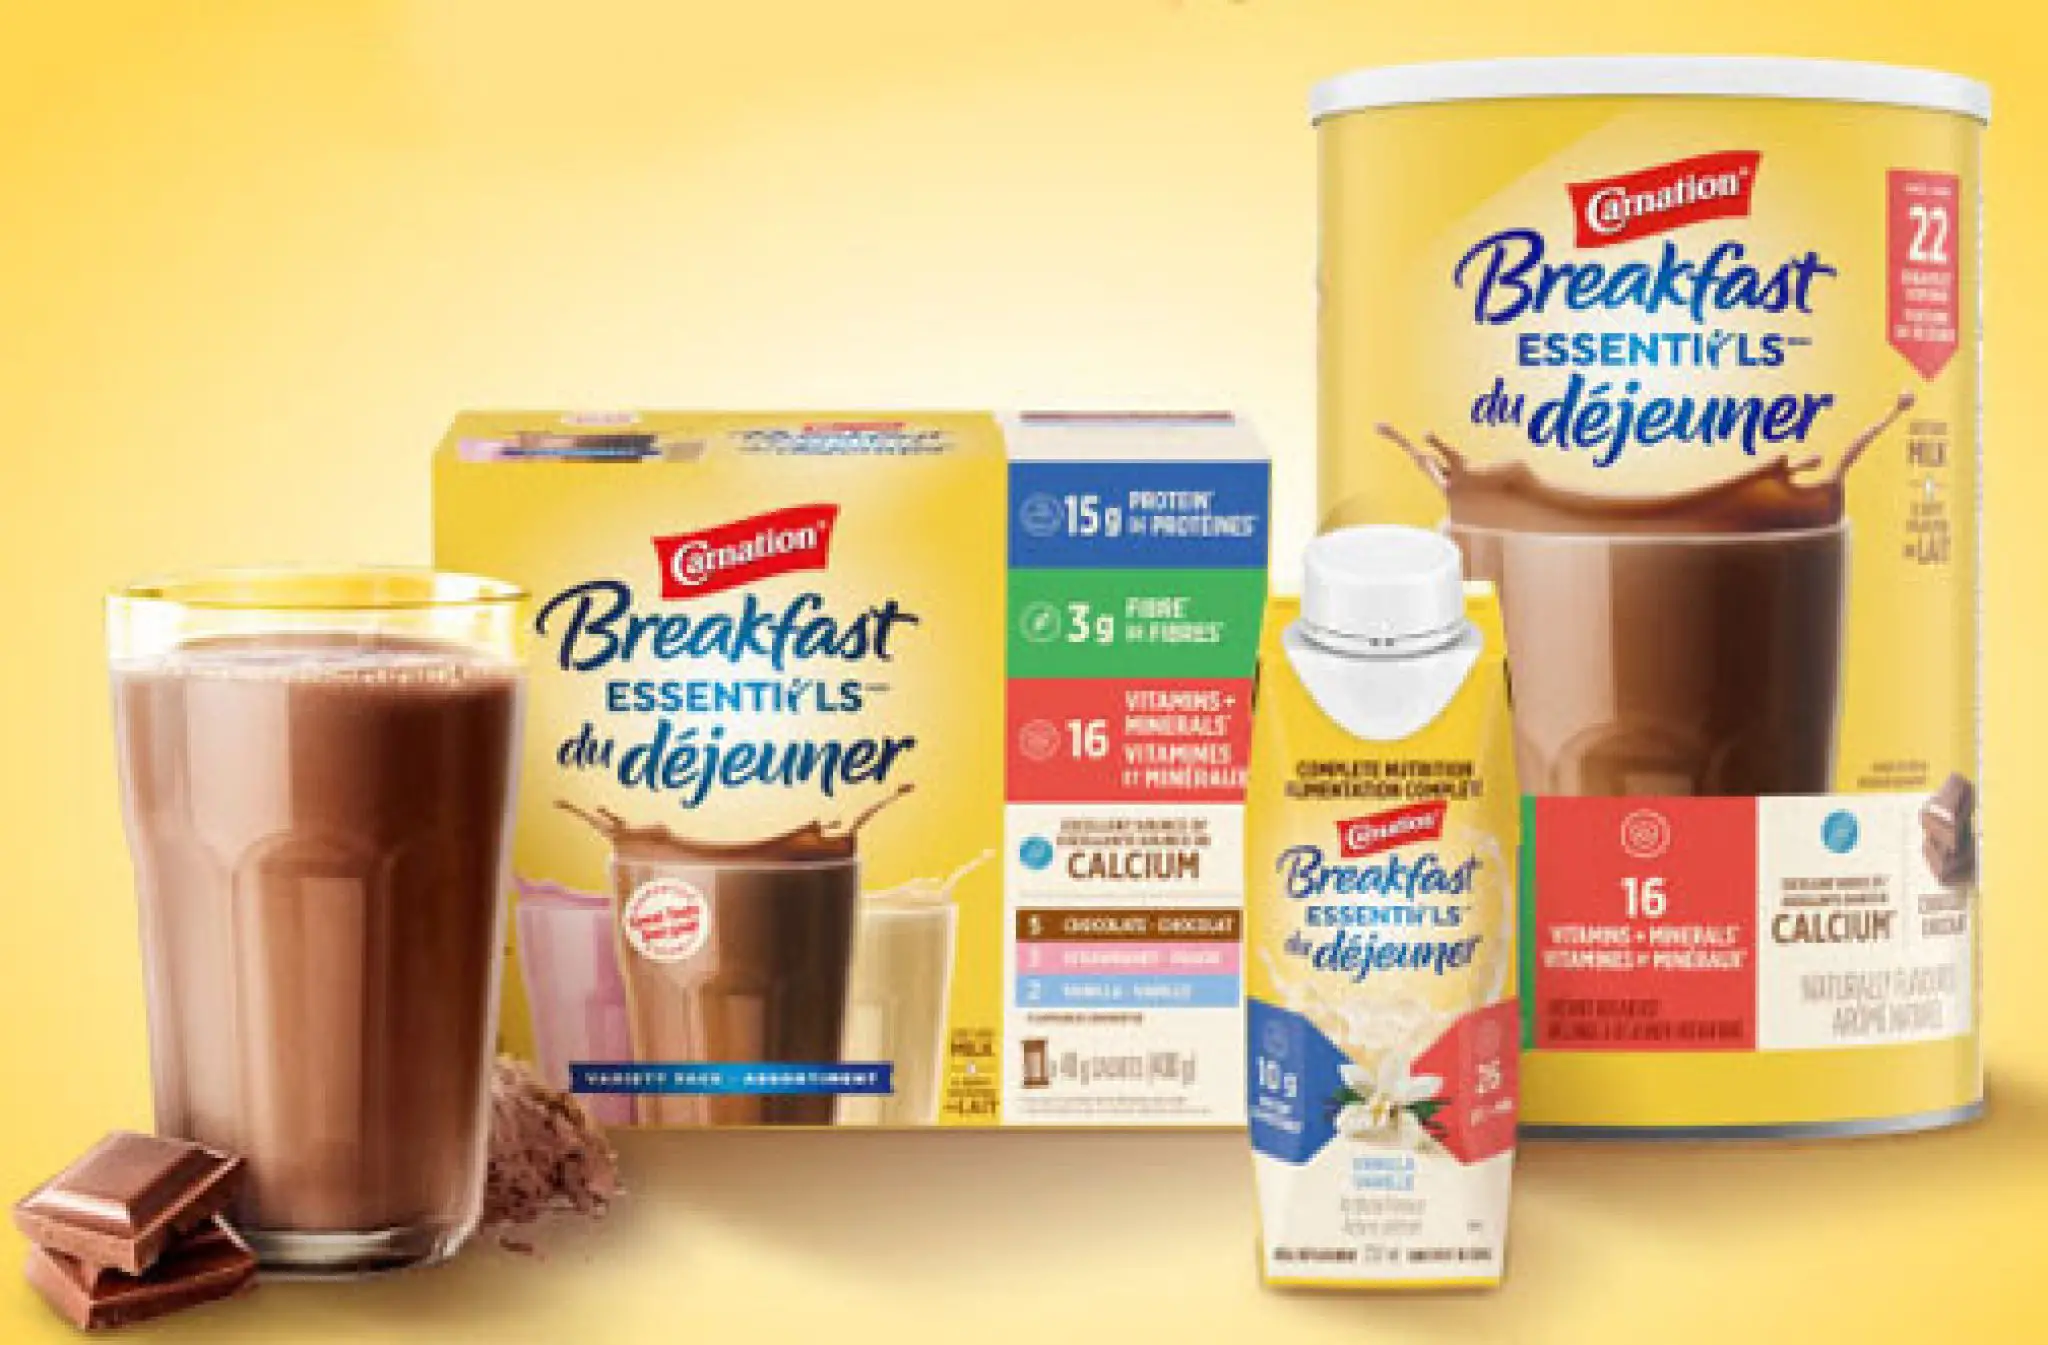 Carnation Breakfast Essentials Coupon  Deals from ...